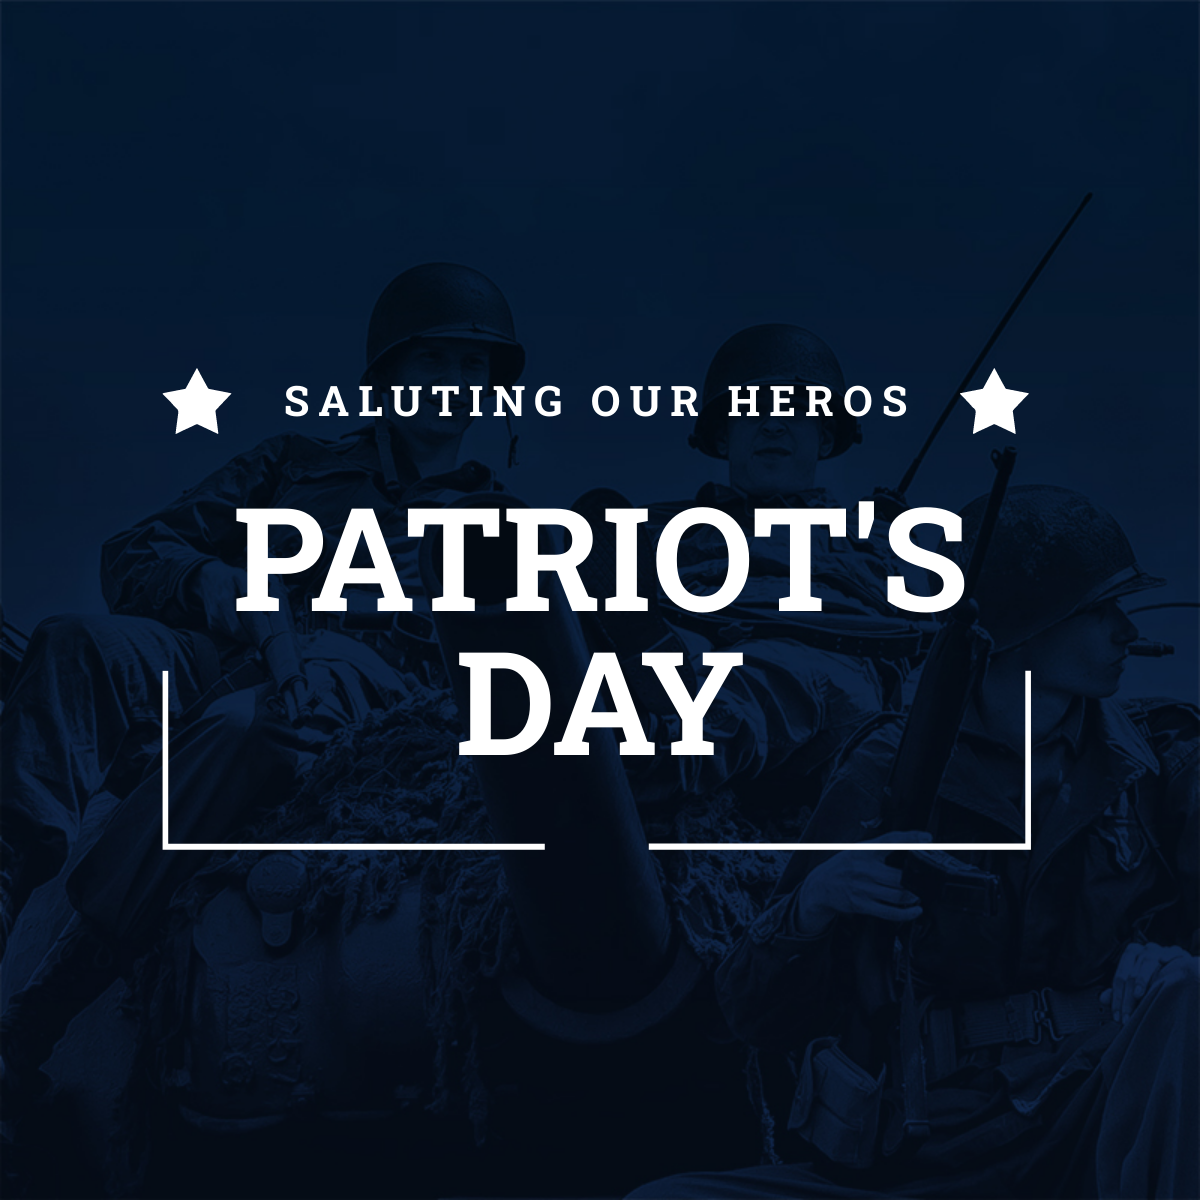 Patriot's Day YouTube Profile Photo Template